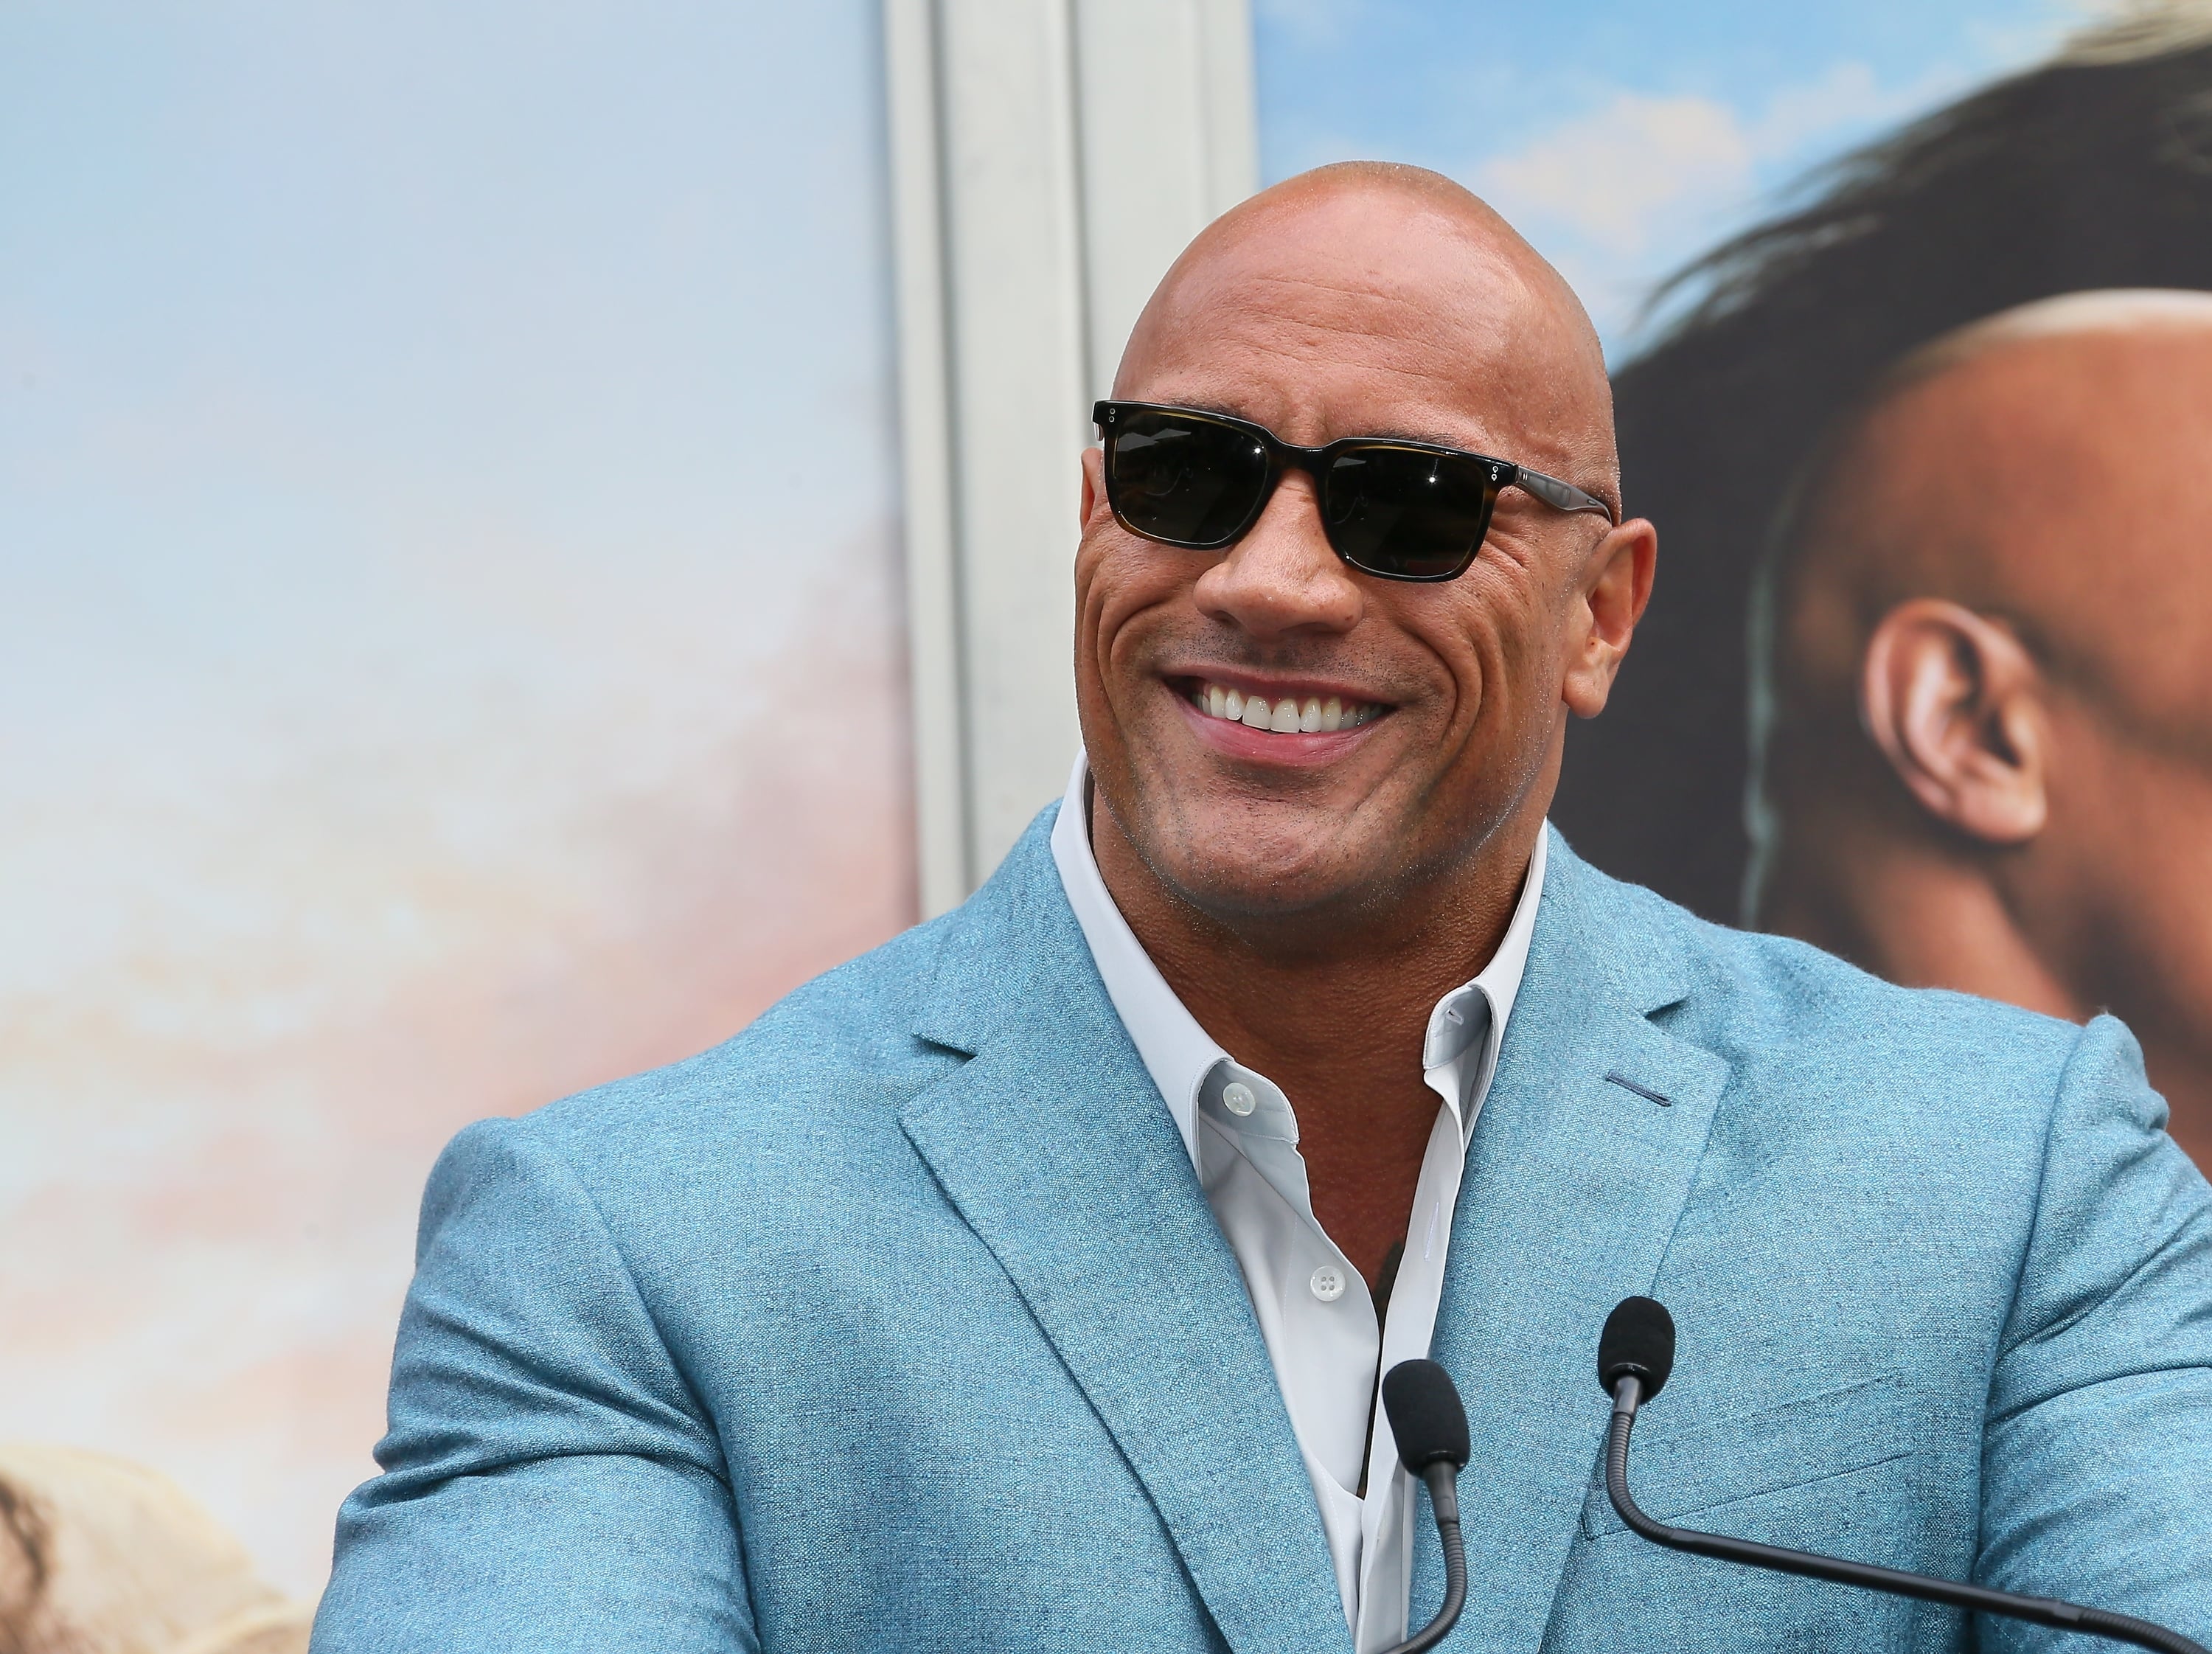 Trailer for Dwayne Johnson's 'Young Rock' Biopic Sitcom